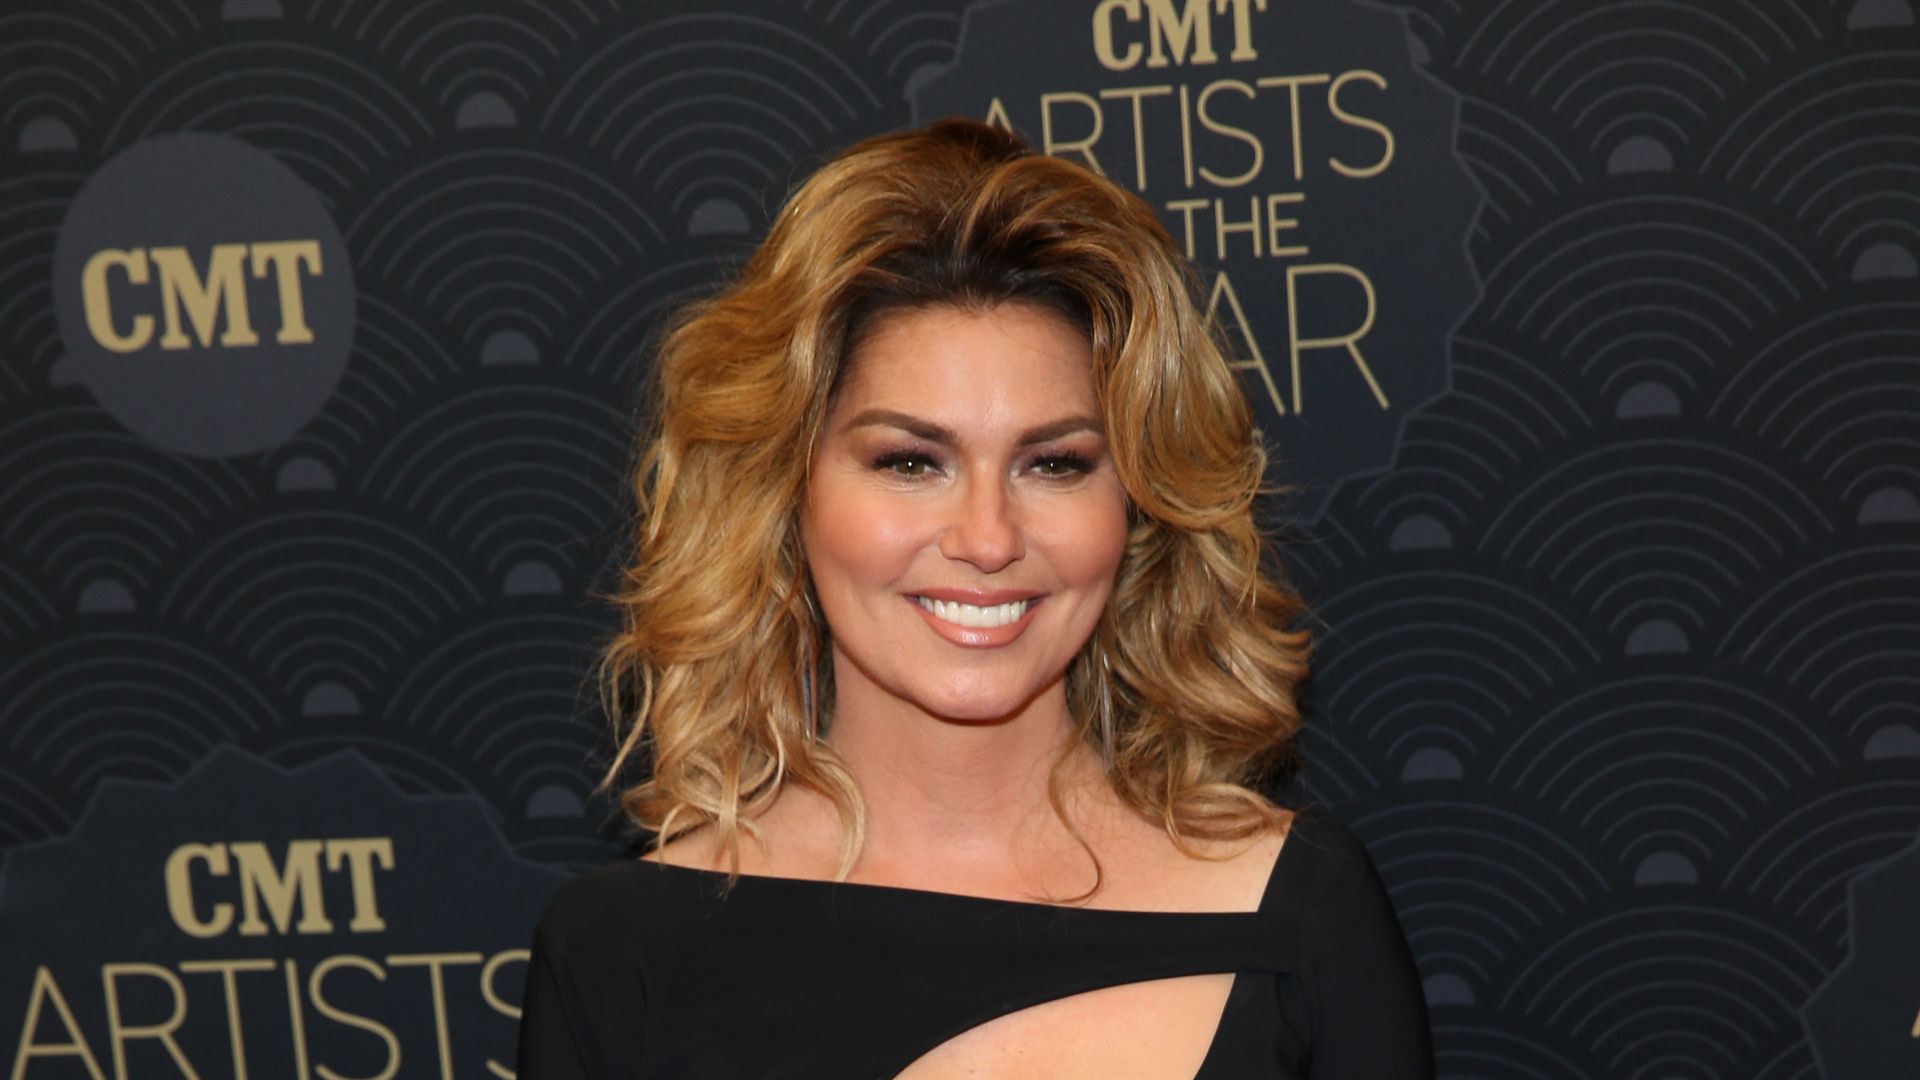 Shania Twain arrives on the red carpet at CMT Artists of the Year 2016 at Schermerhorn Symphony Center on October 19, 2016 in Nashville, Tennessee